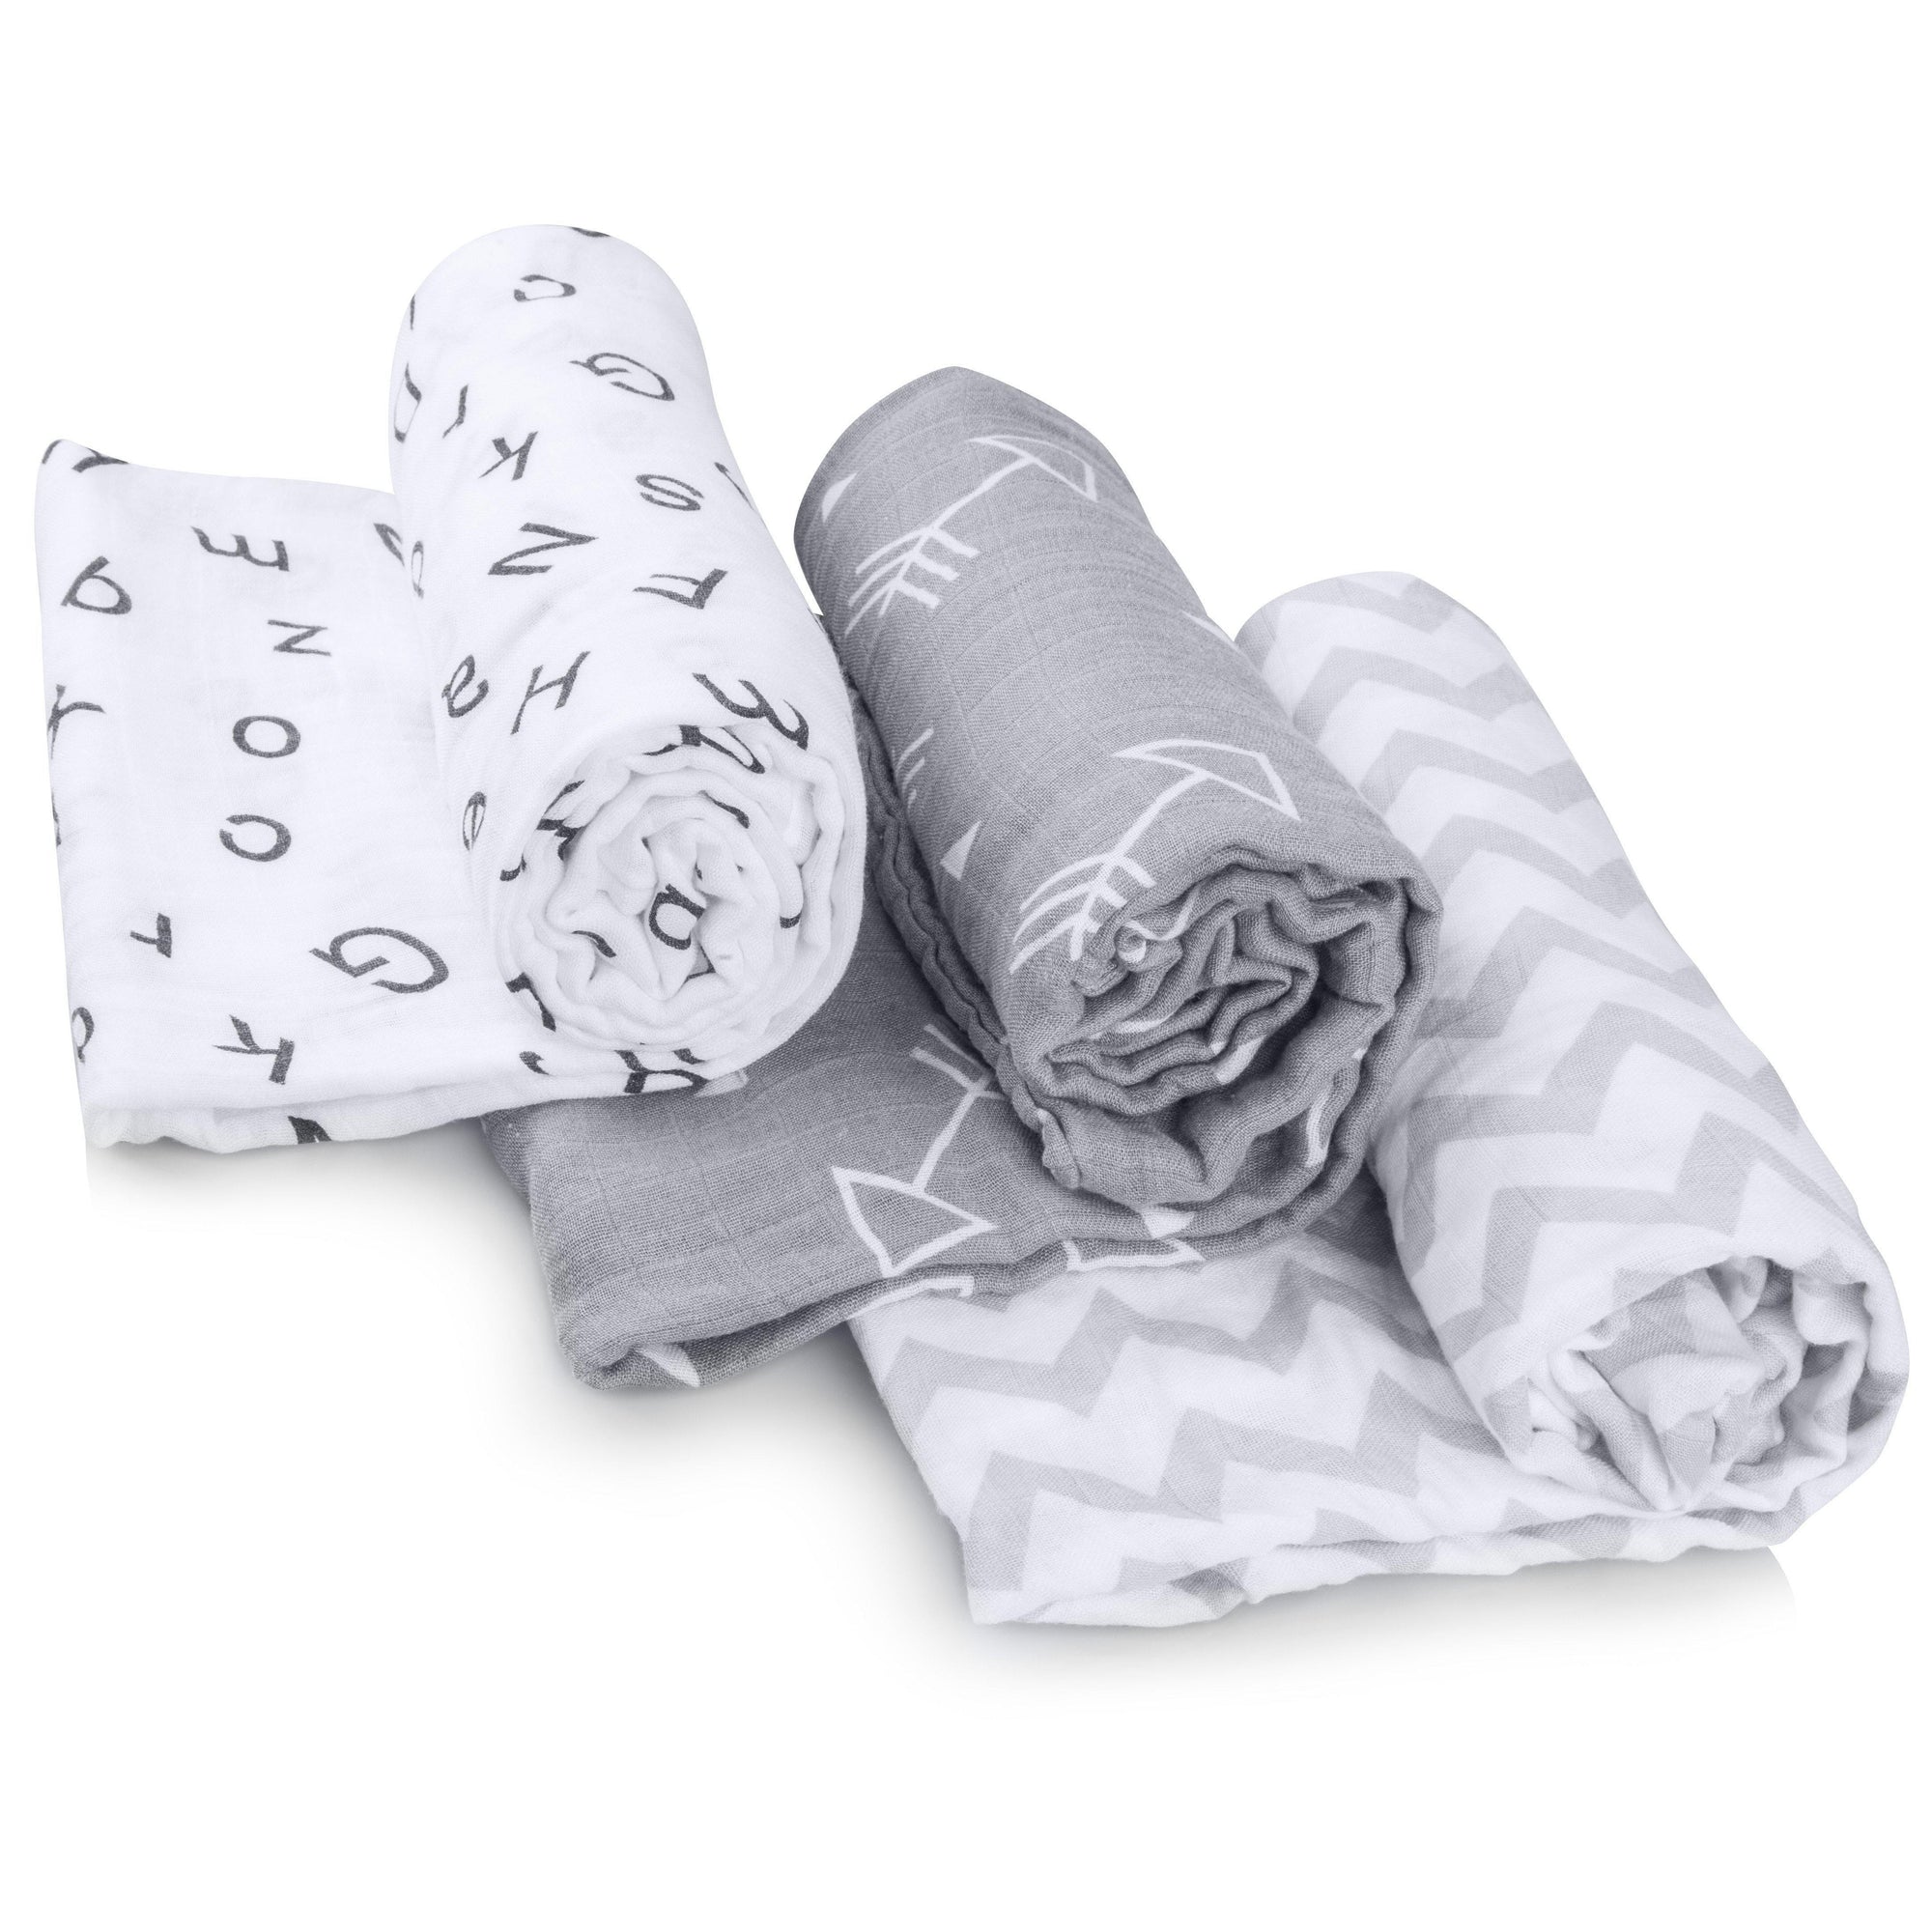 My Little Baby Bug Muslin Swaddle Blankets - 3 pack, Unisex - My Little Baby Bug